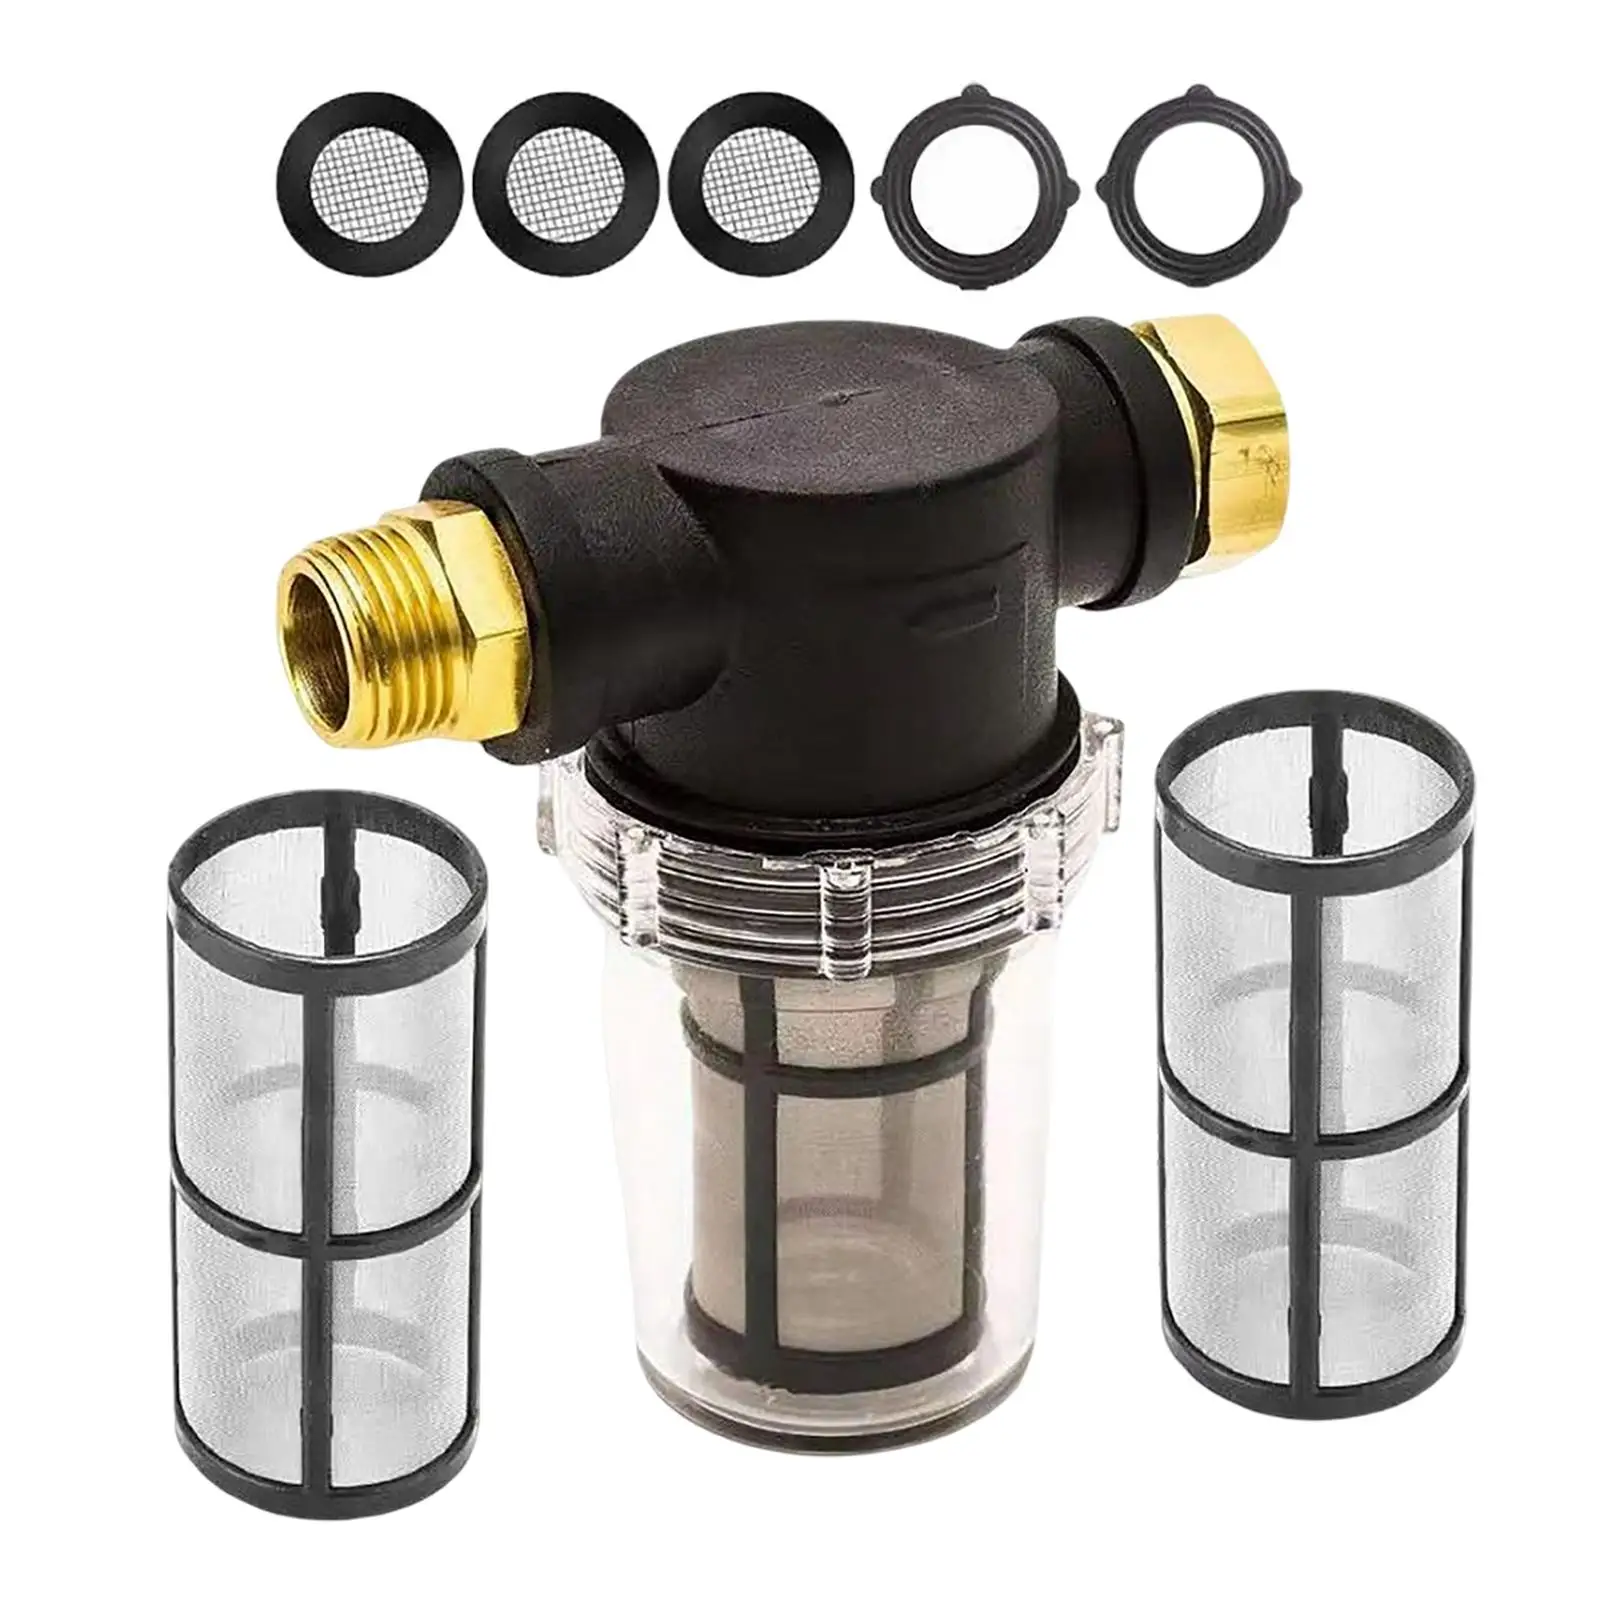 Sediment Filter Attachment for Pressure Washer Inline Filter for Sediment Outdoor Gardening Inlet Water for Water Hose Car Wash